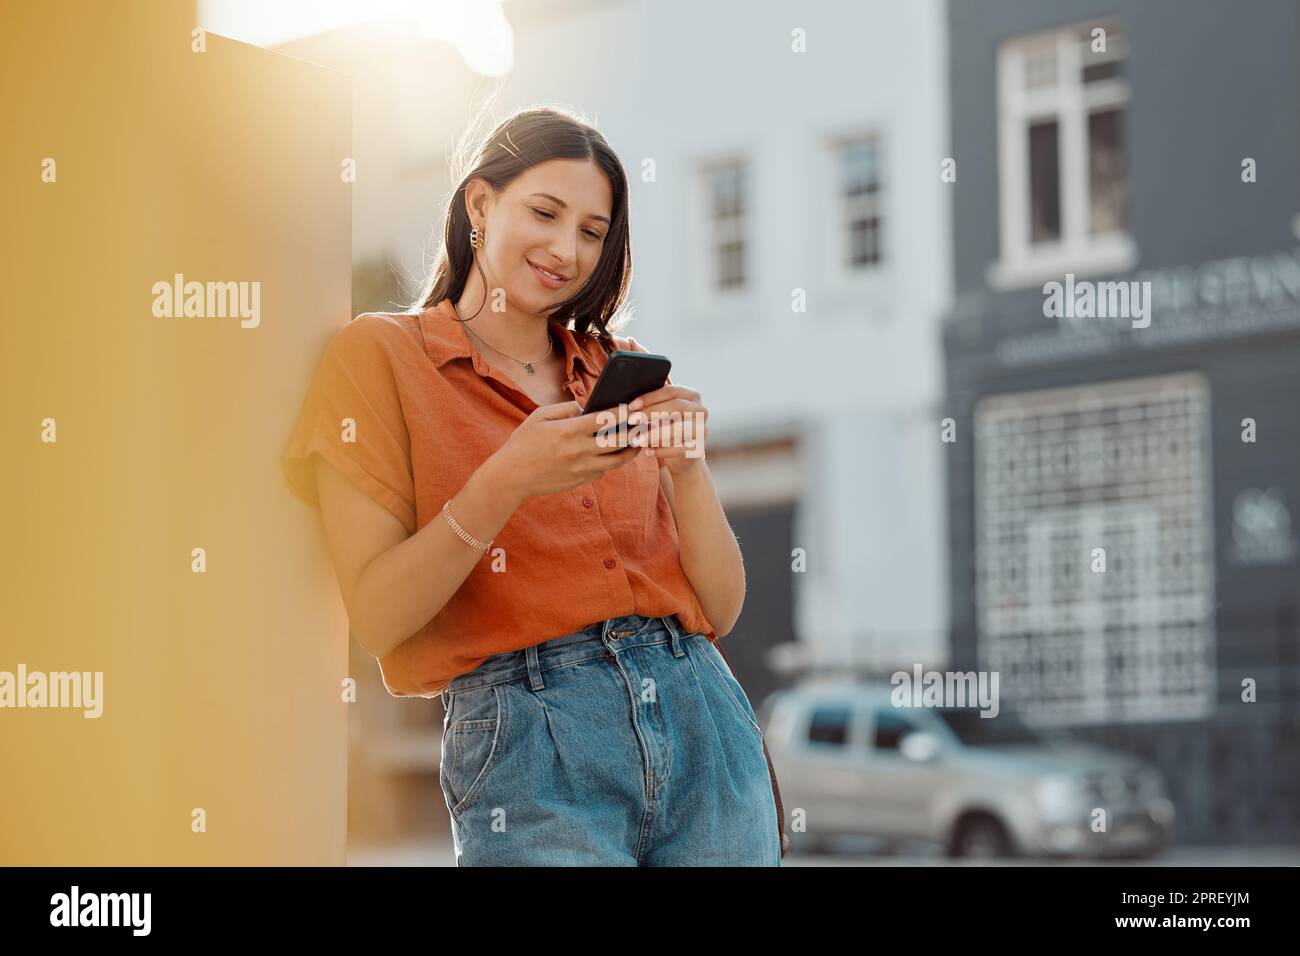 Texting on a phone, waiting for public transport and commuting in the city with a young female tourist enjoying travel and sightseeing. Looking online for places to see and visit while on holiday Stock Photo